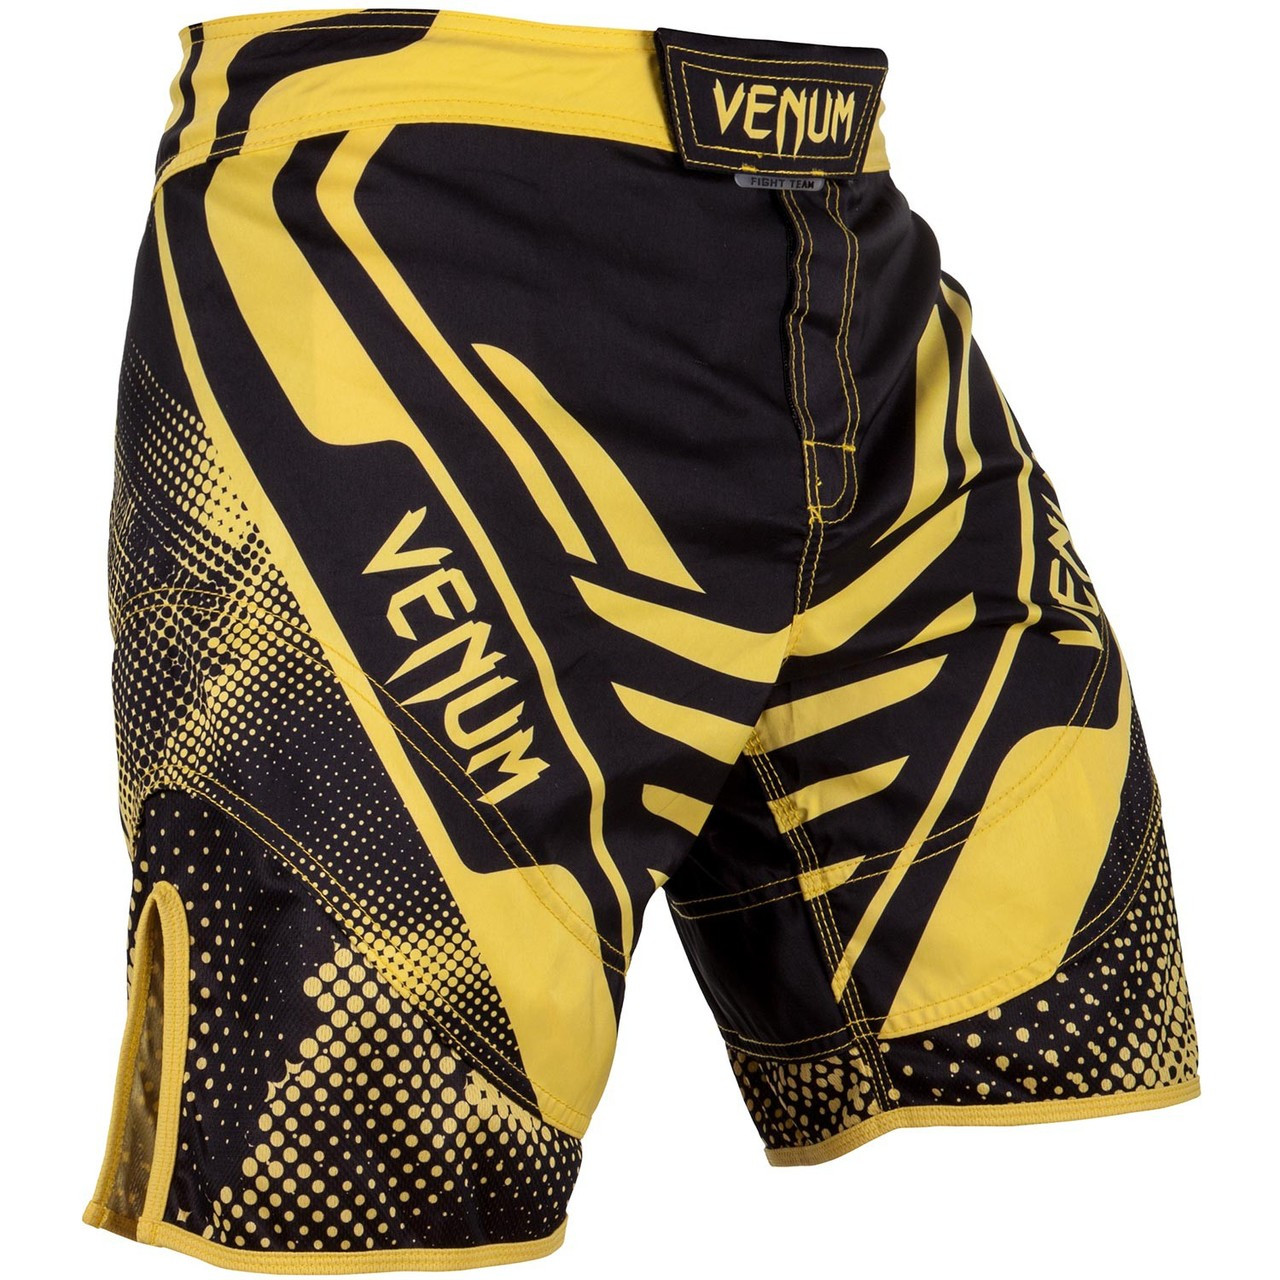 Venum Technical shorts Black and Yellow